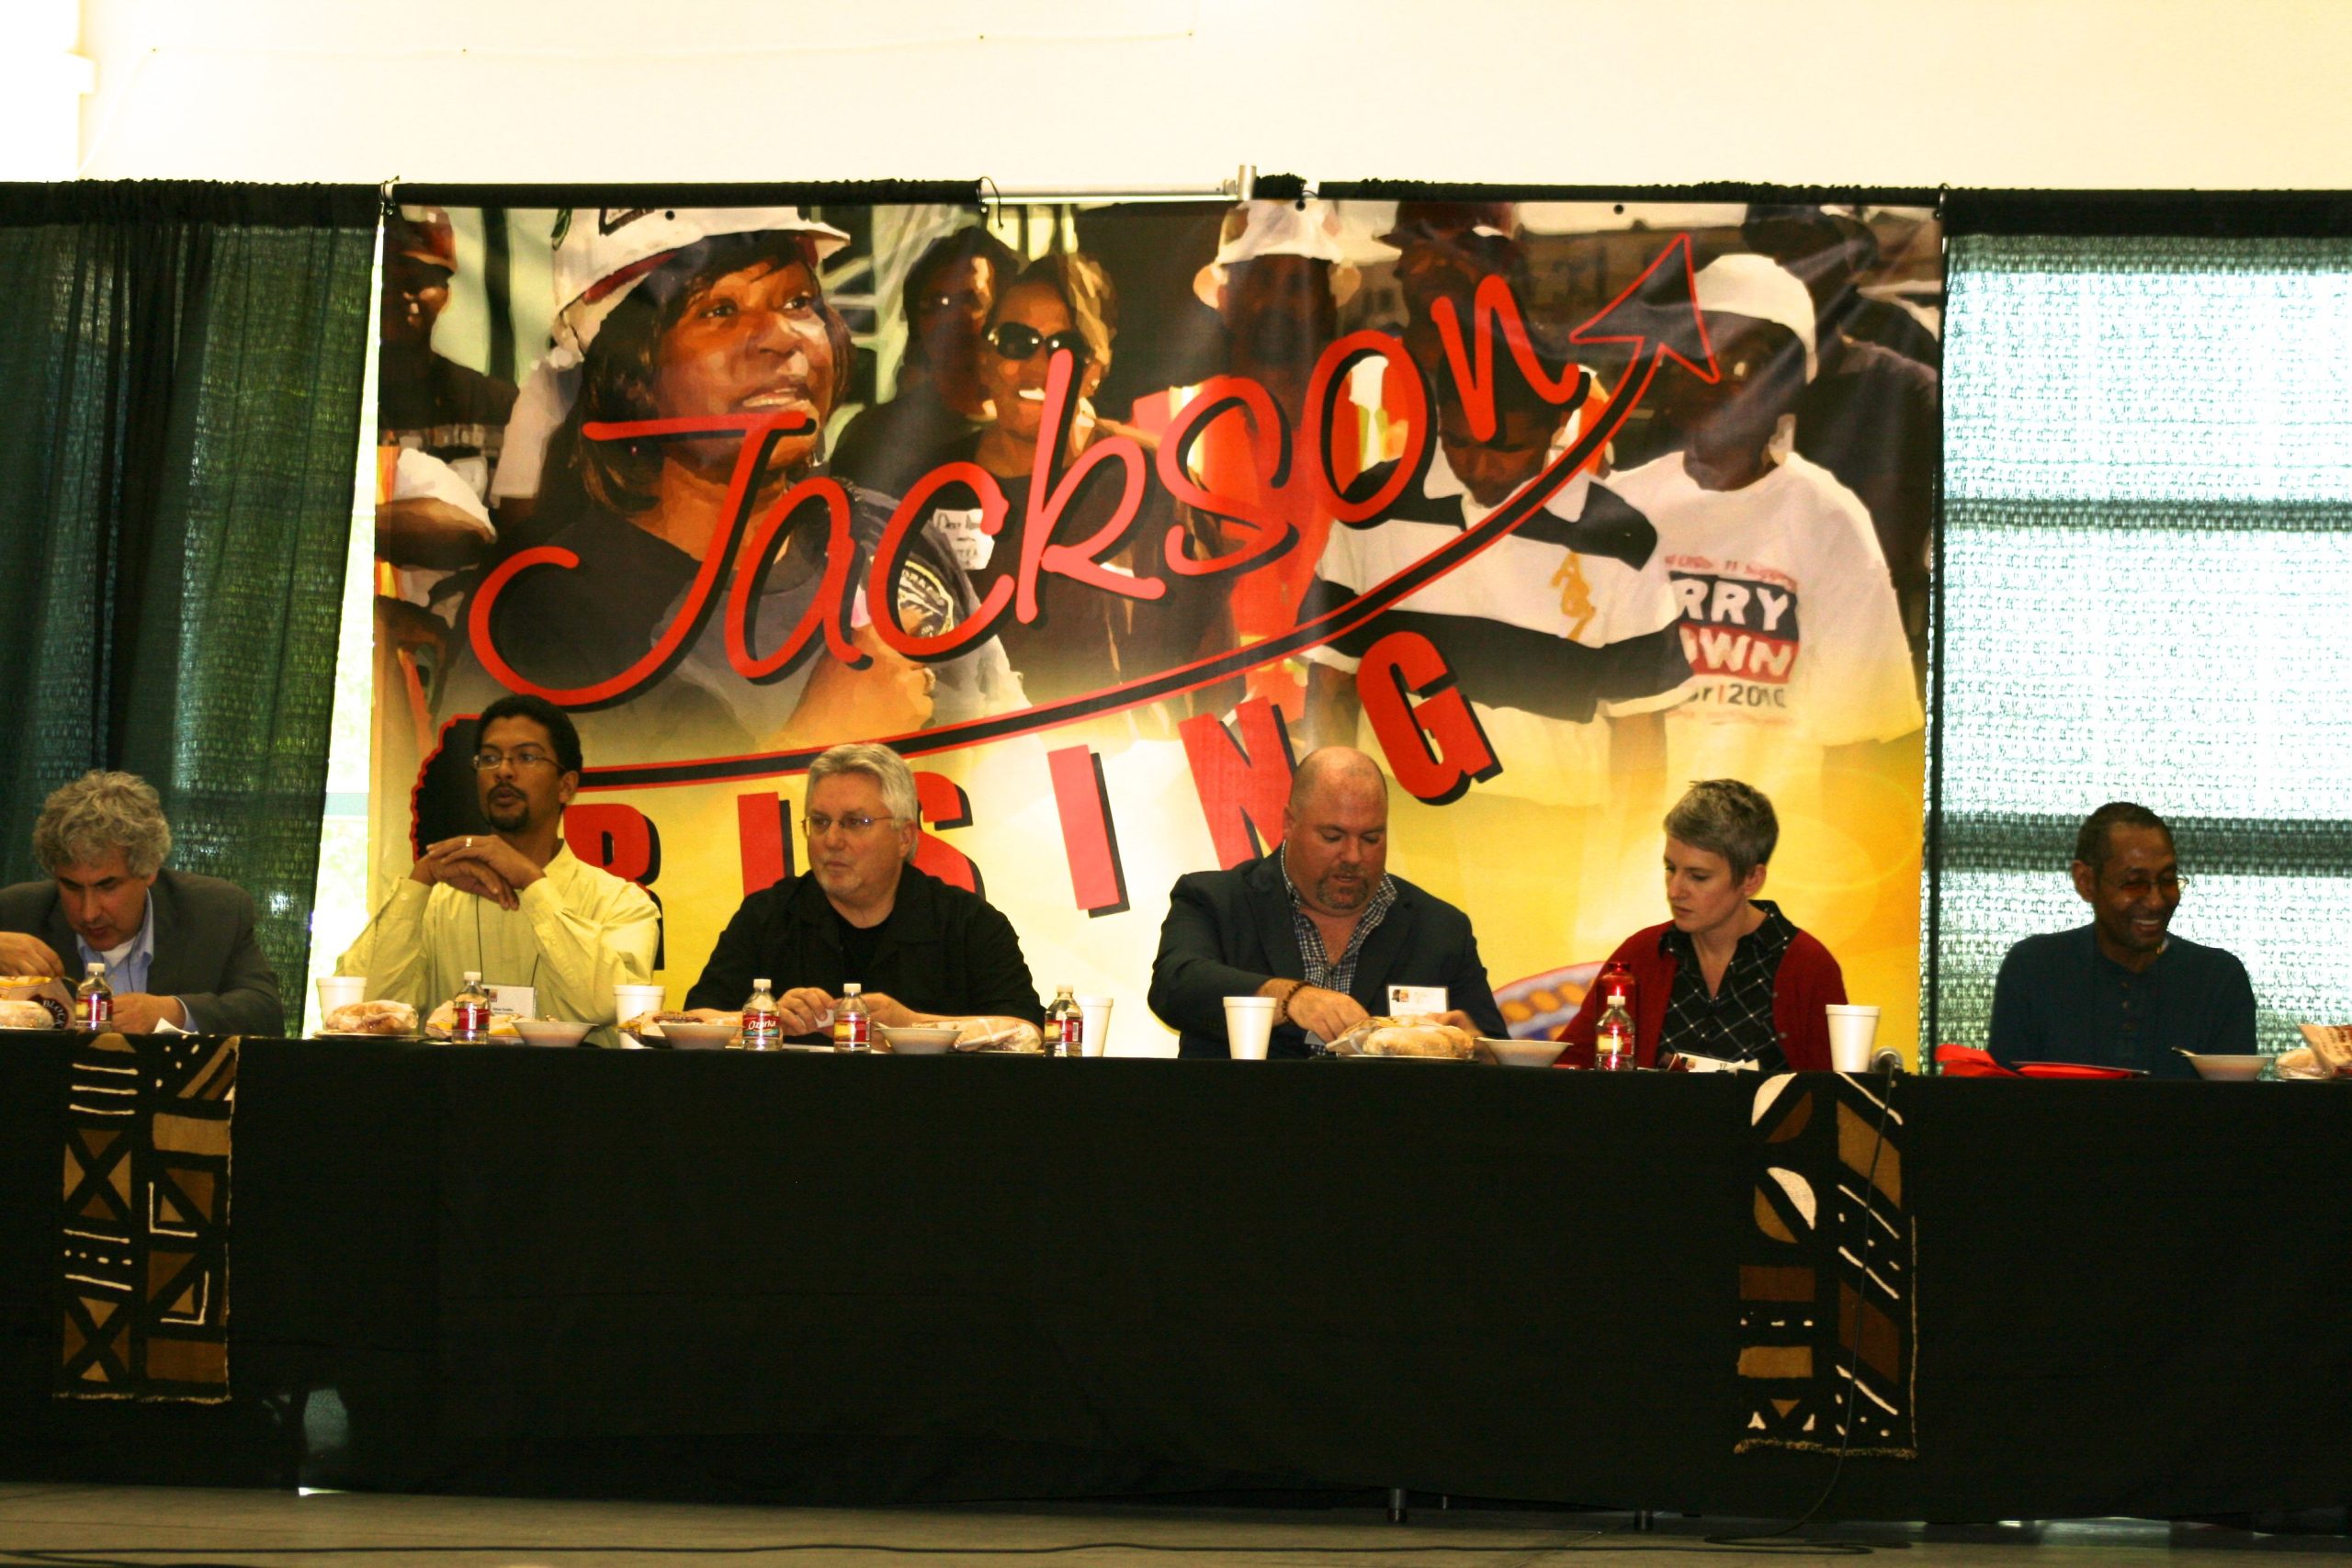 Scene from the Jackson Rising Conference featuring Michael Peck of One Worker/One Vote